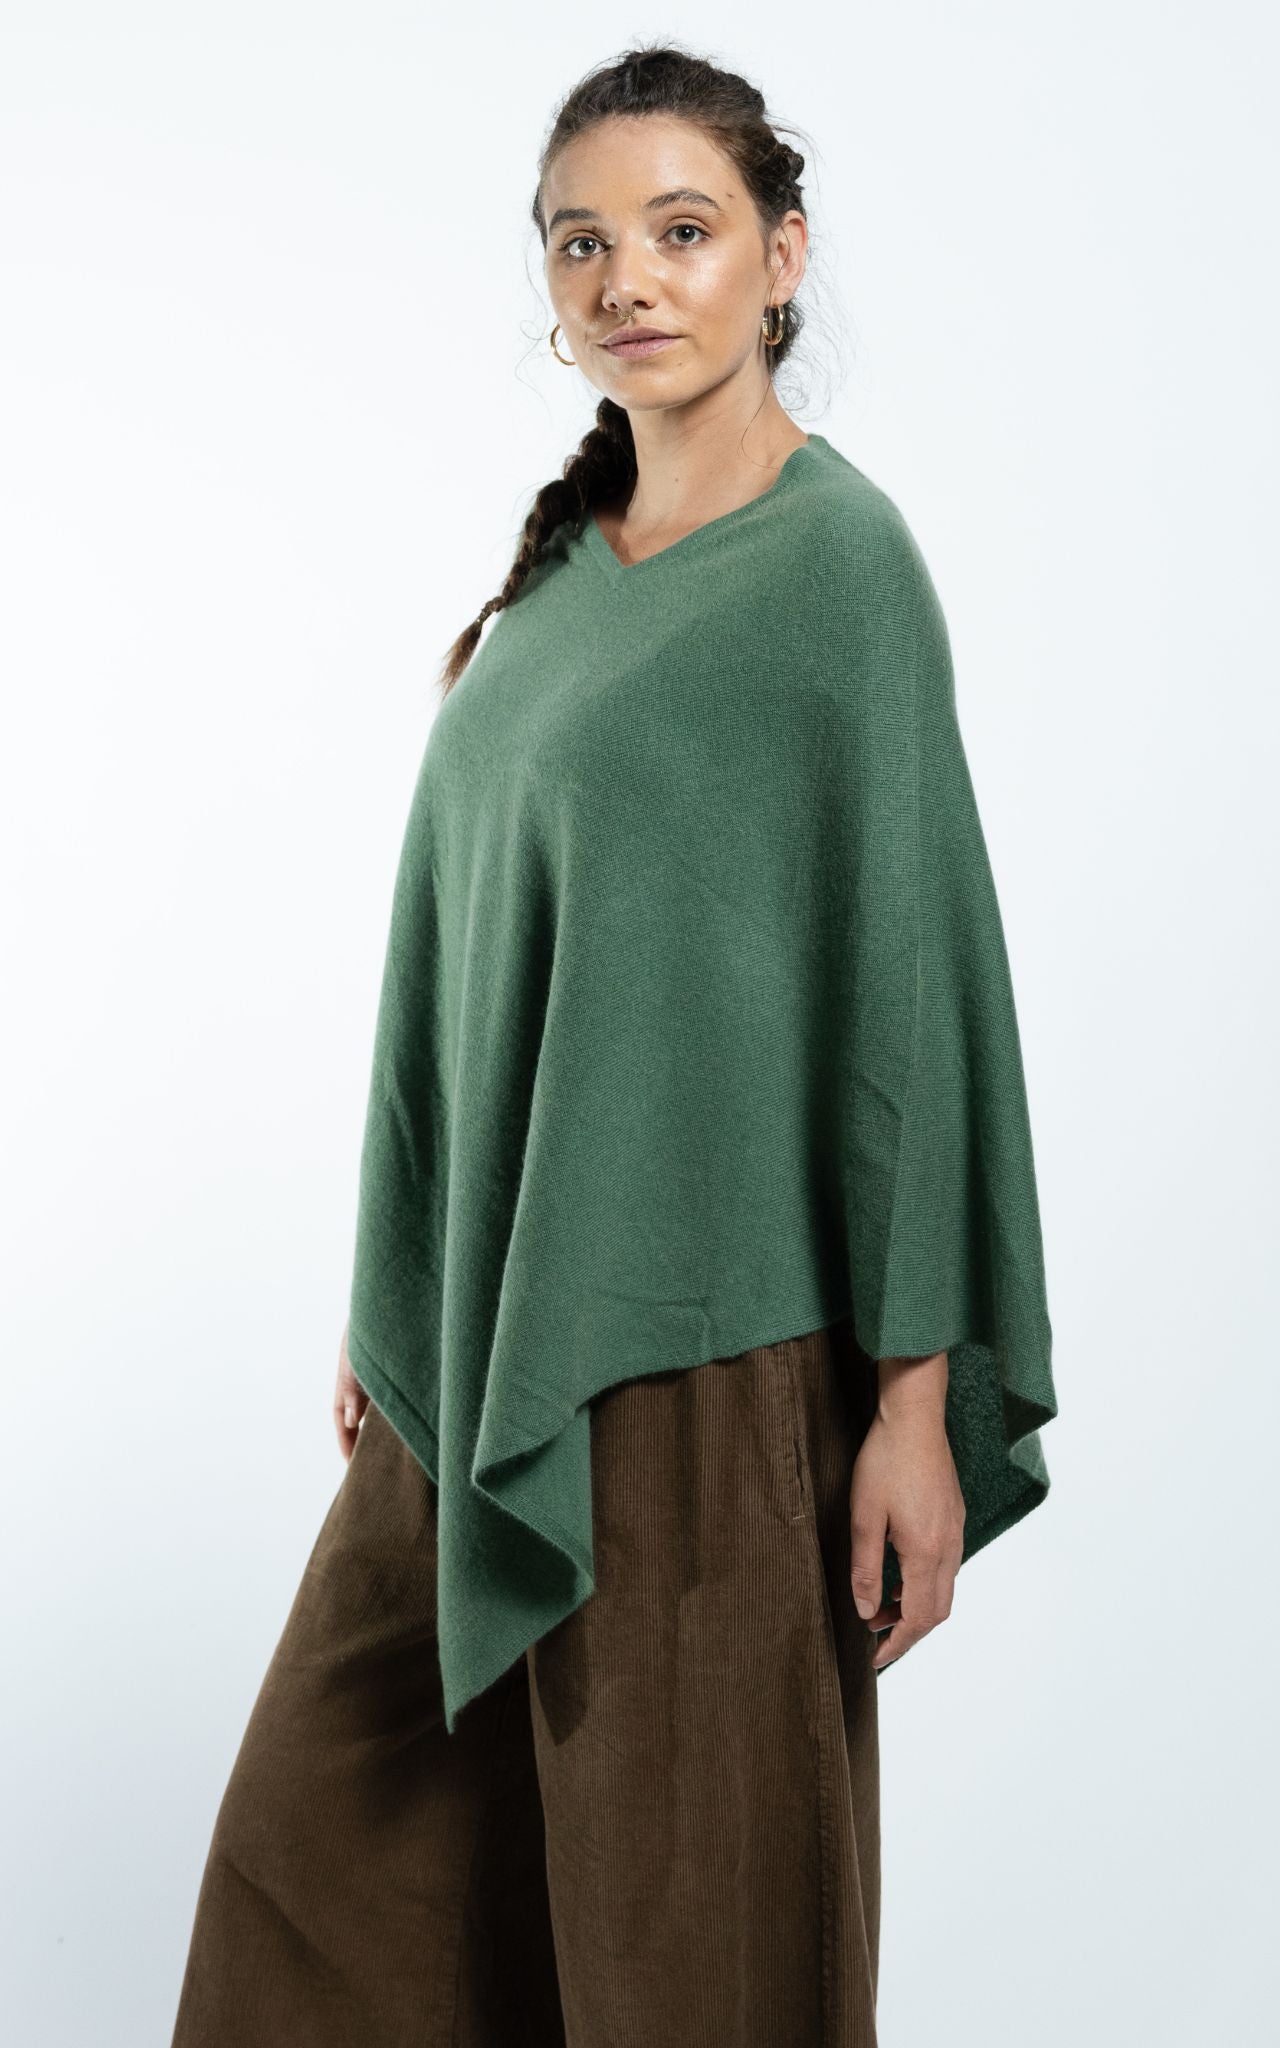 Surya Australia Ethical Cashmere Poncho made in Nepal - Teal